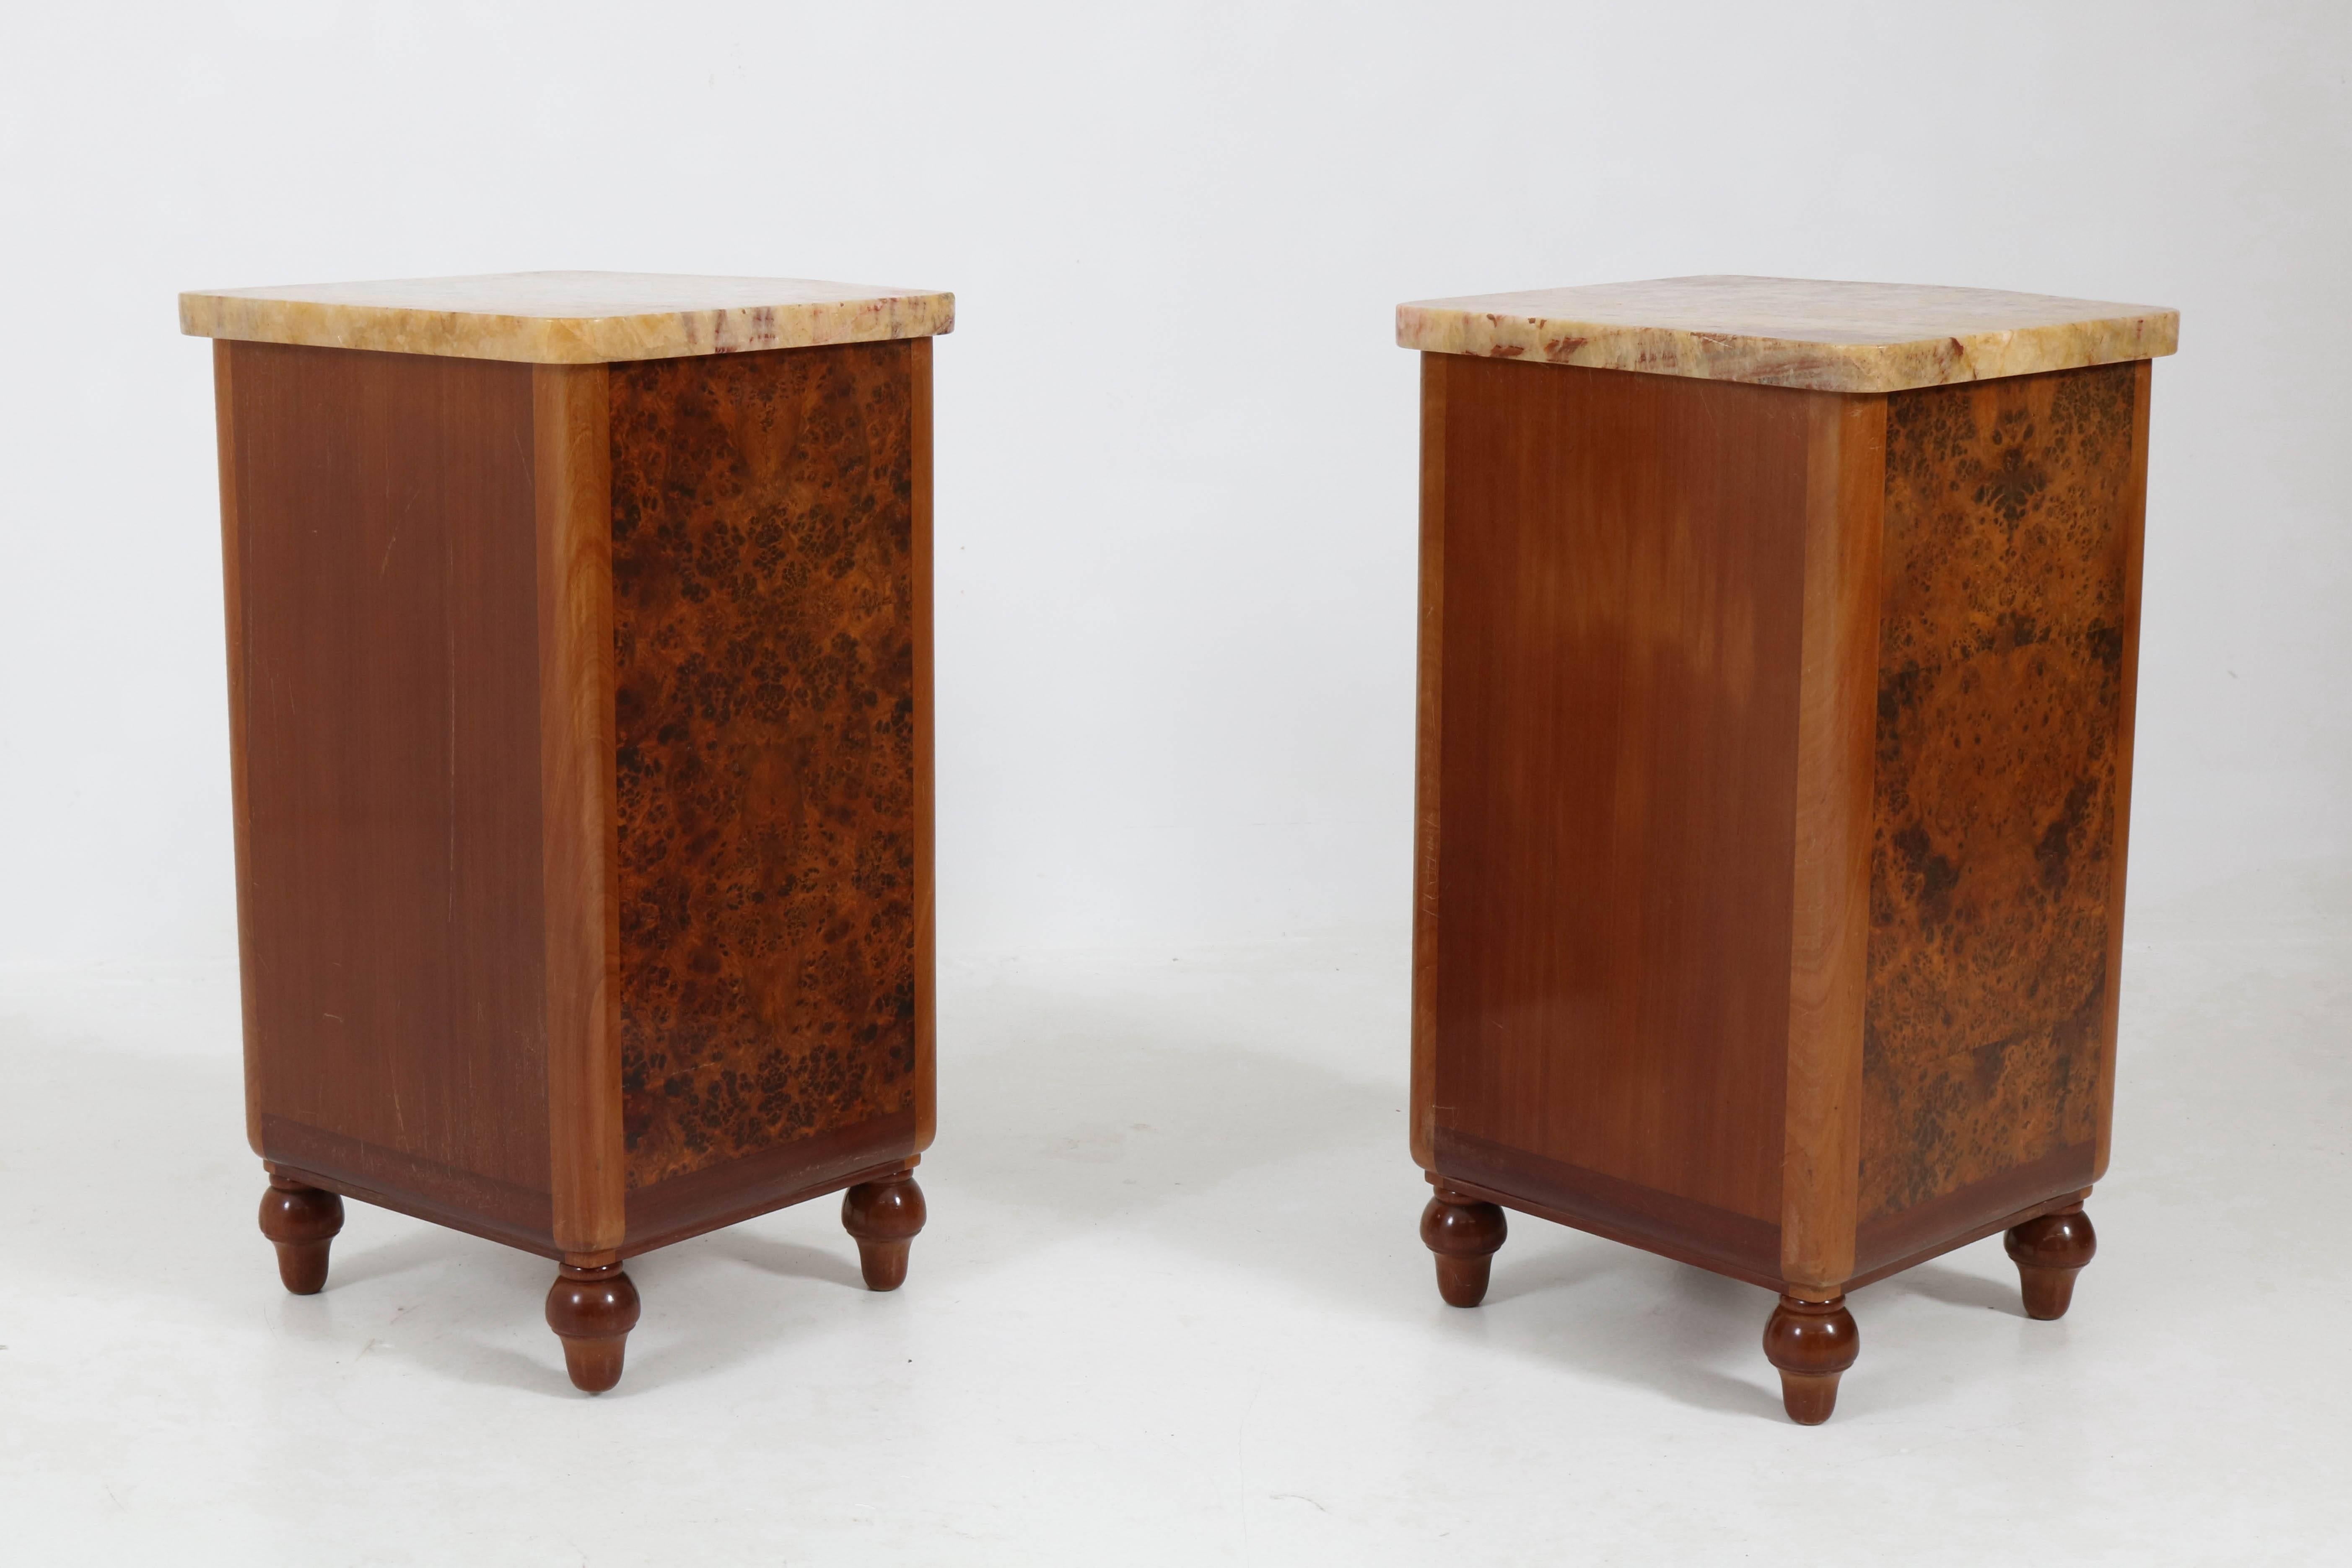 Pair of French Art Deco Burl Walnut Nightstands or Bedside Tables, 1930s 1